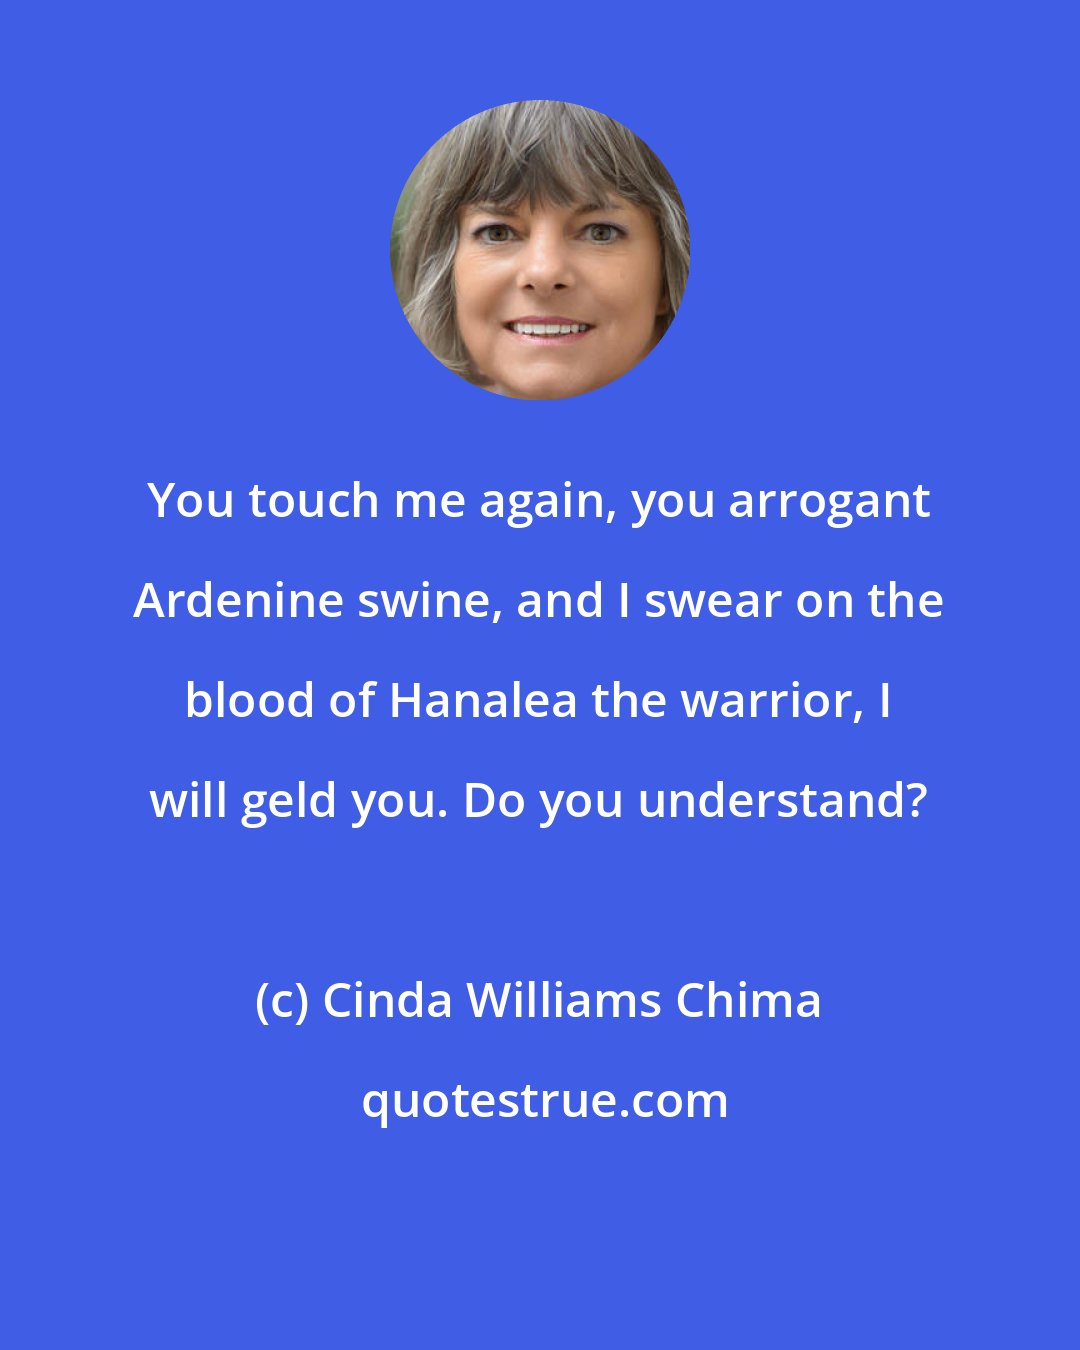 Cinda Williams Chima: You touch me again, you arrogant Ardenine swine, and I swear on the blood of Hanalea the warrior, I will geld you. Do you understand?